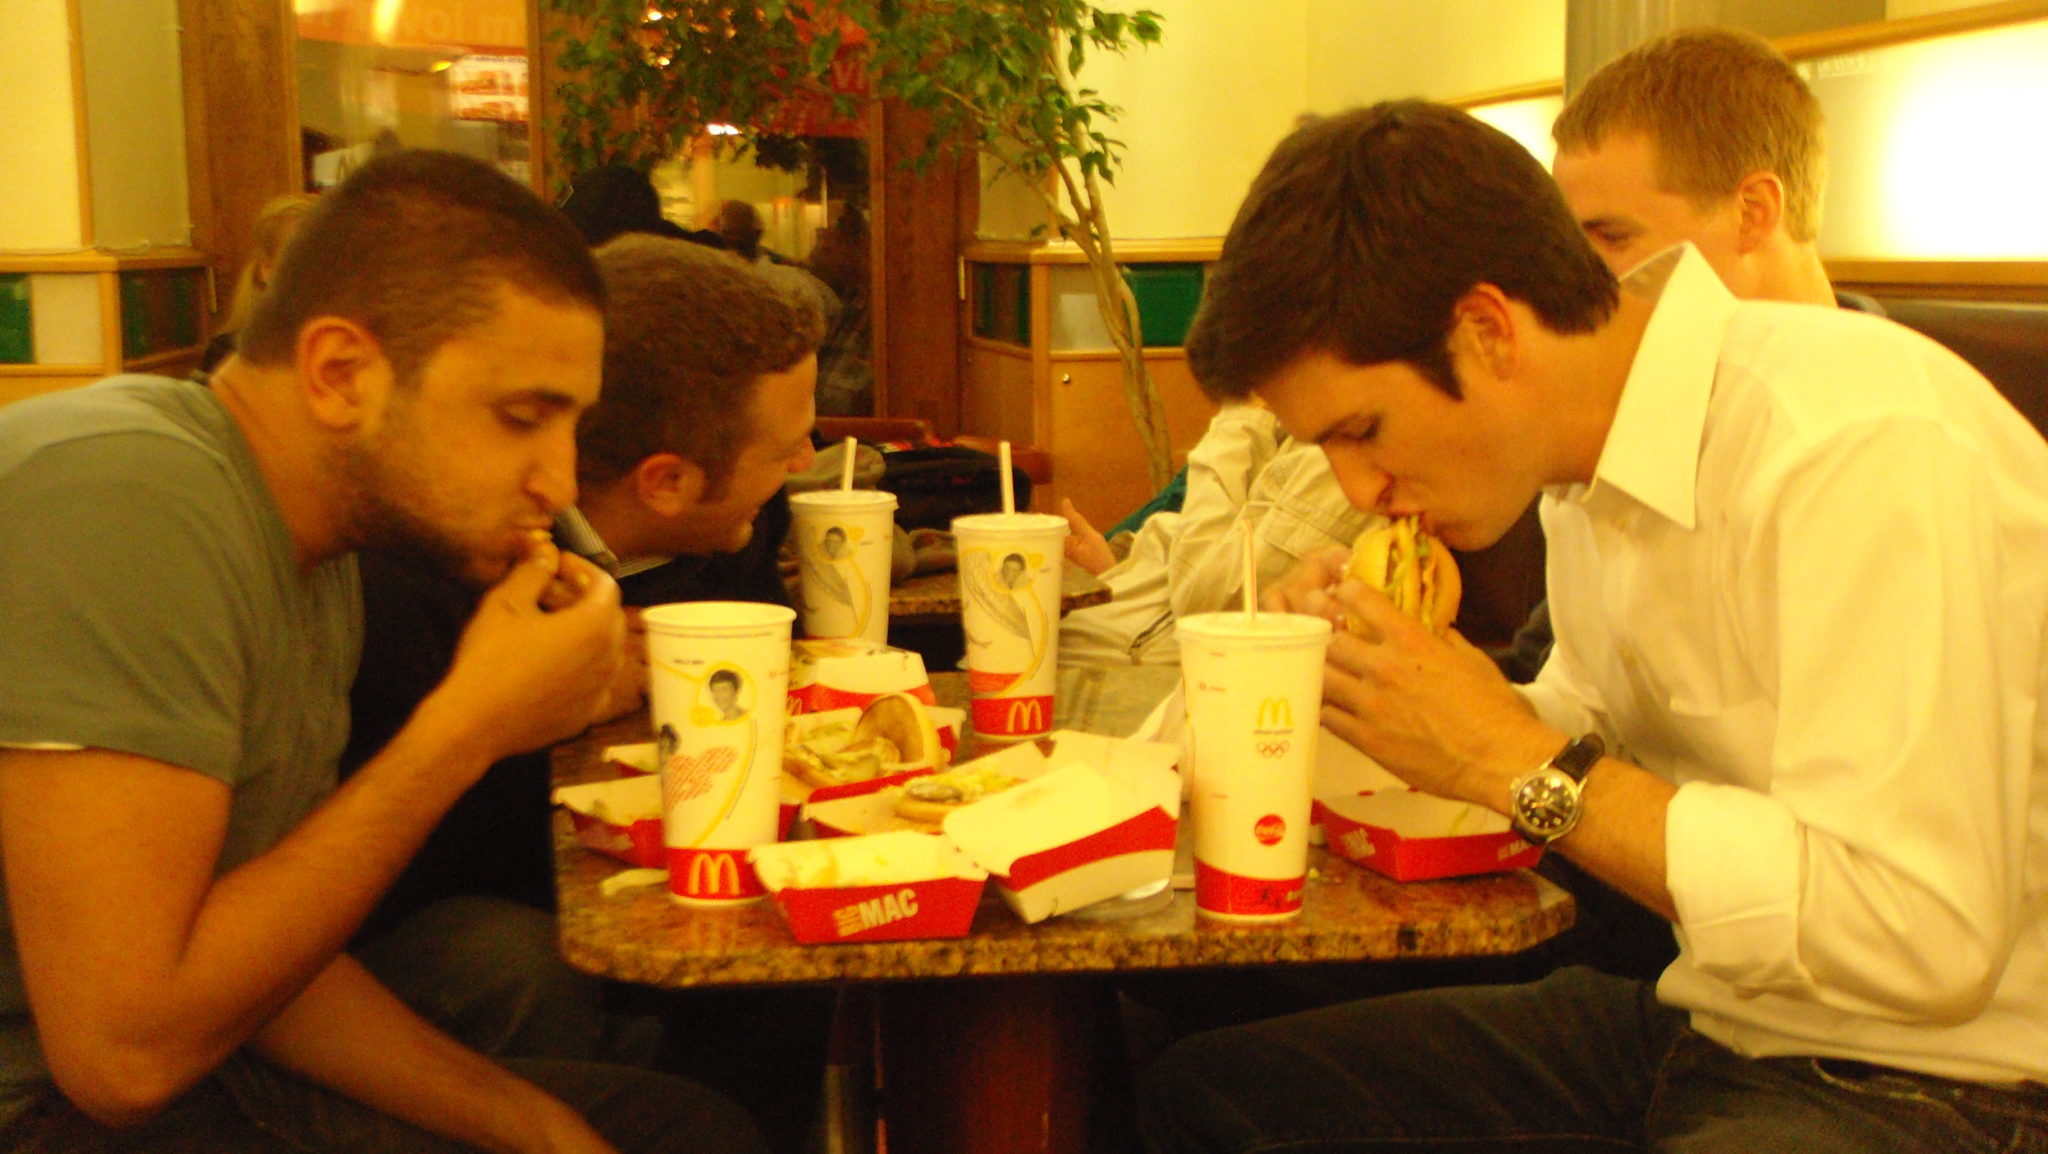 a group of men eating fast food at a table